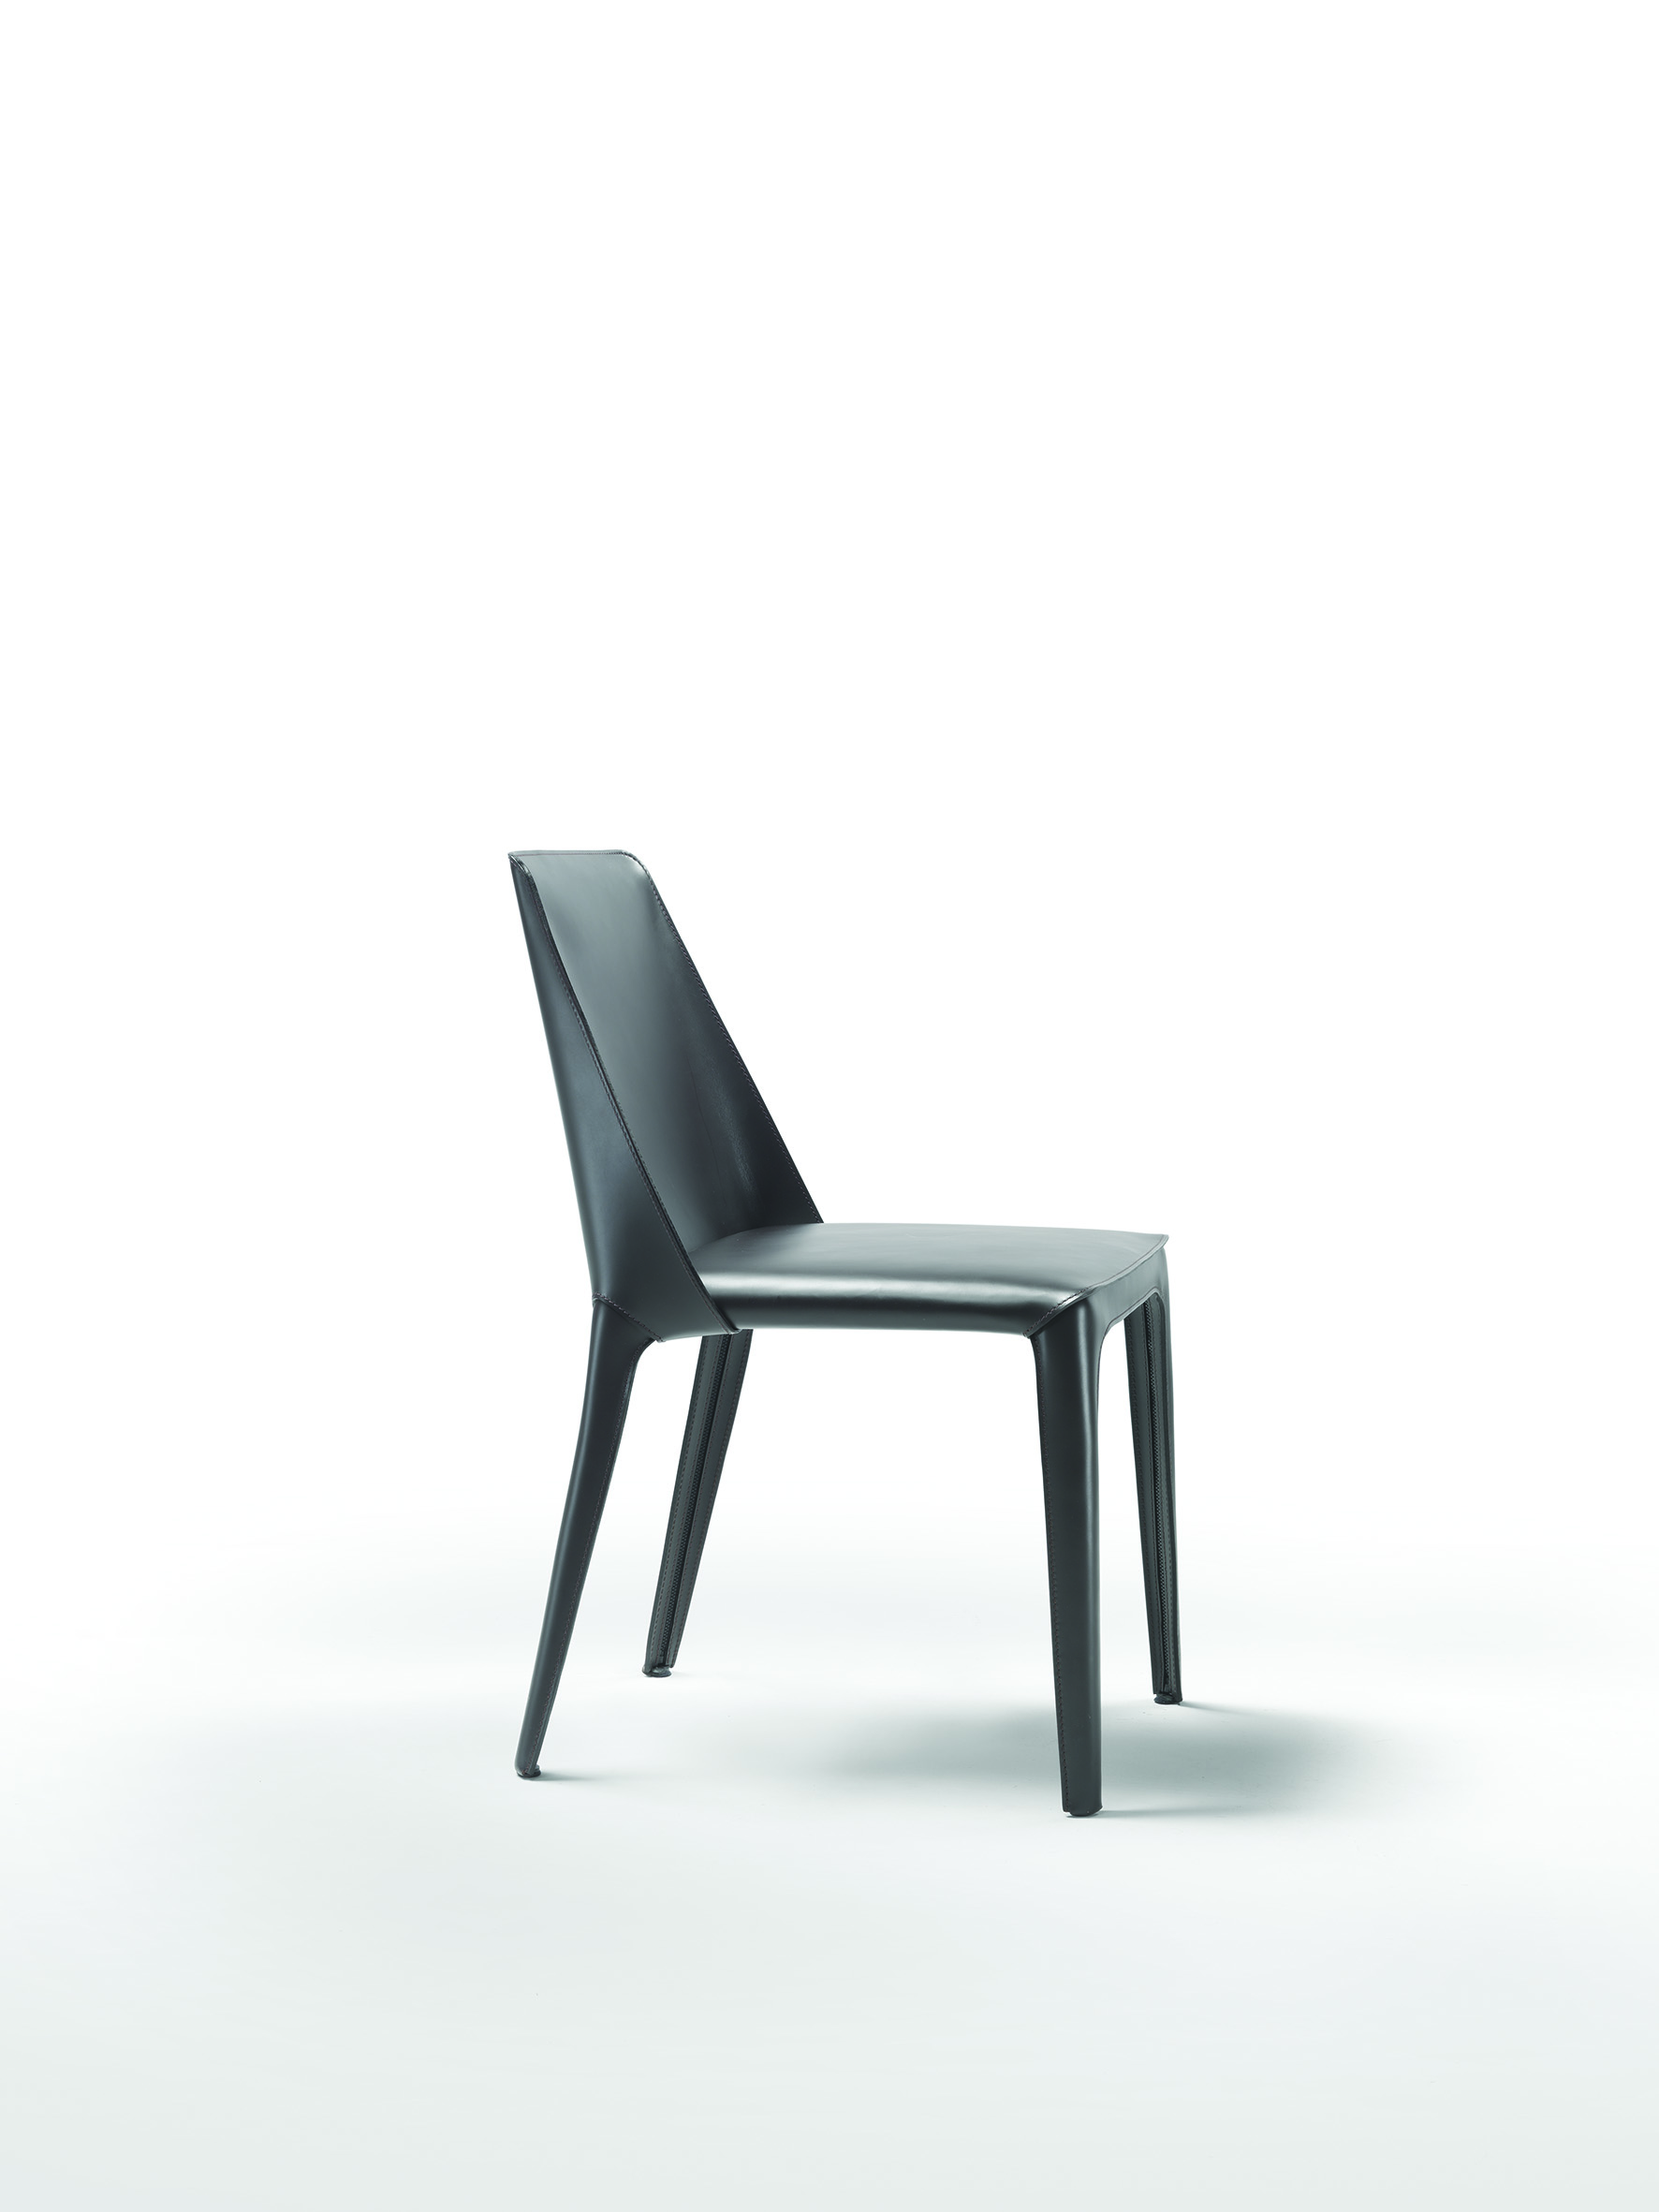 ISABEL – CHAIR